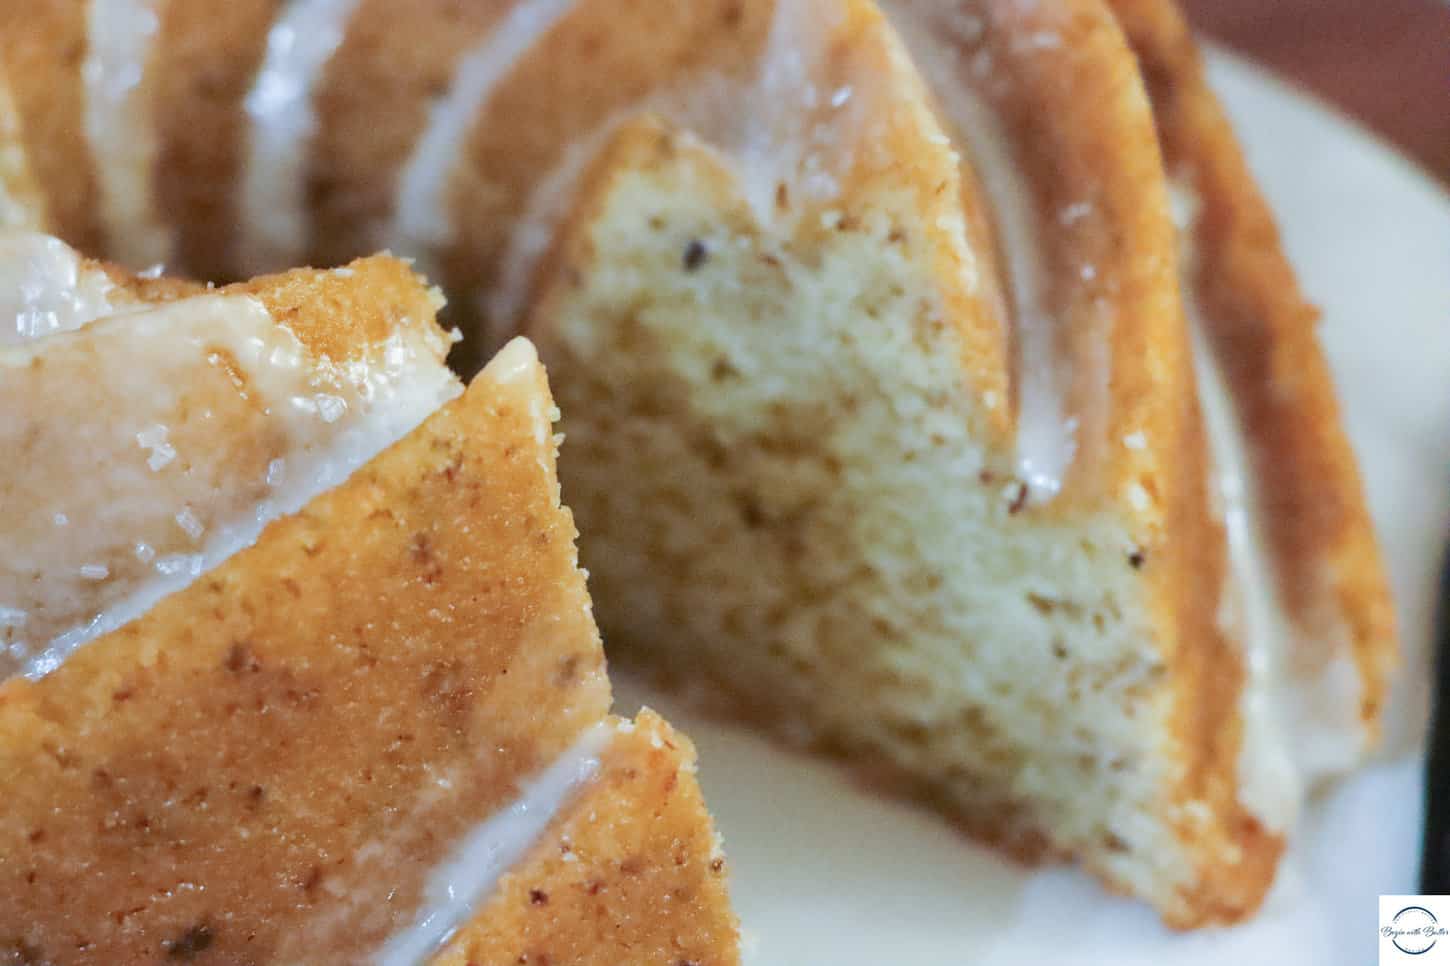 This is a picture of Vegan Lemon Vanilla Pound Cake.